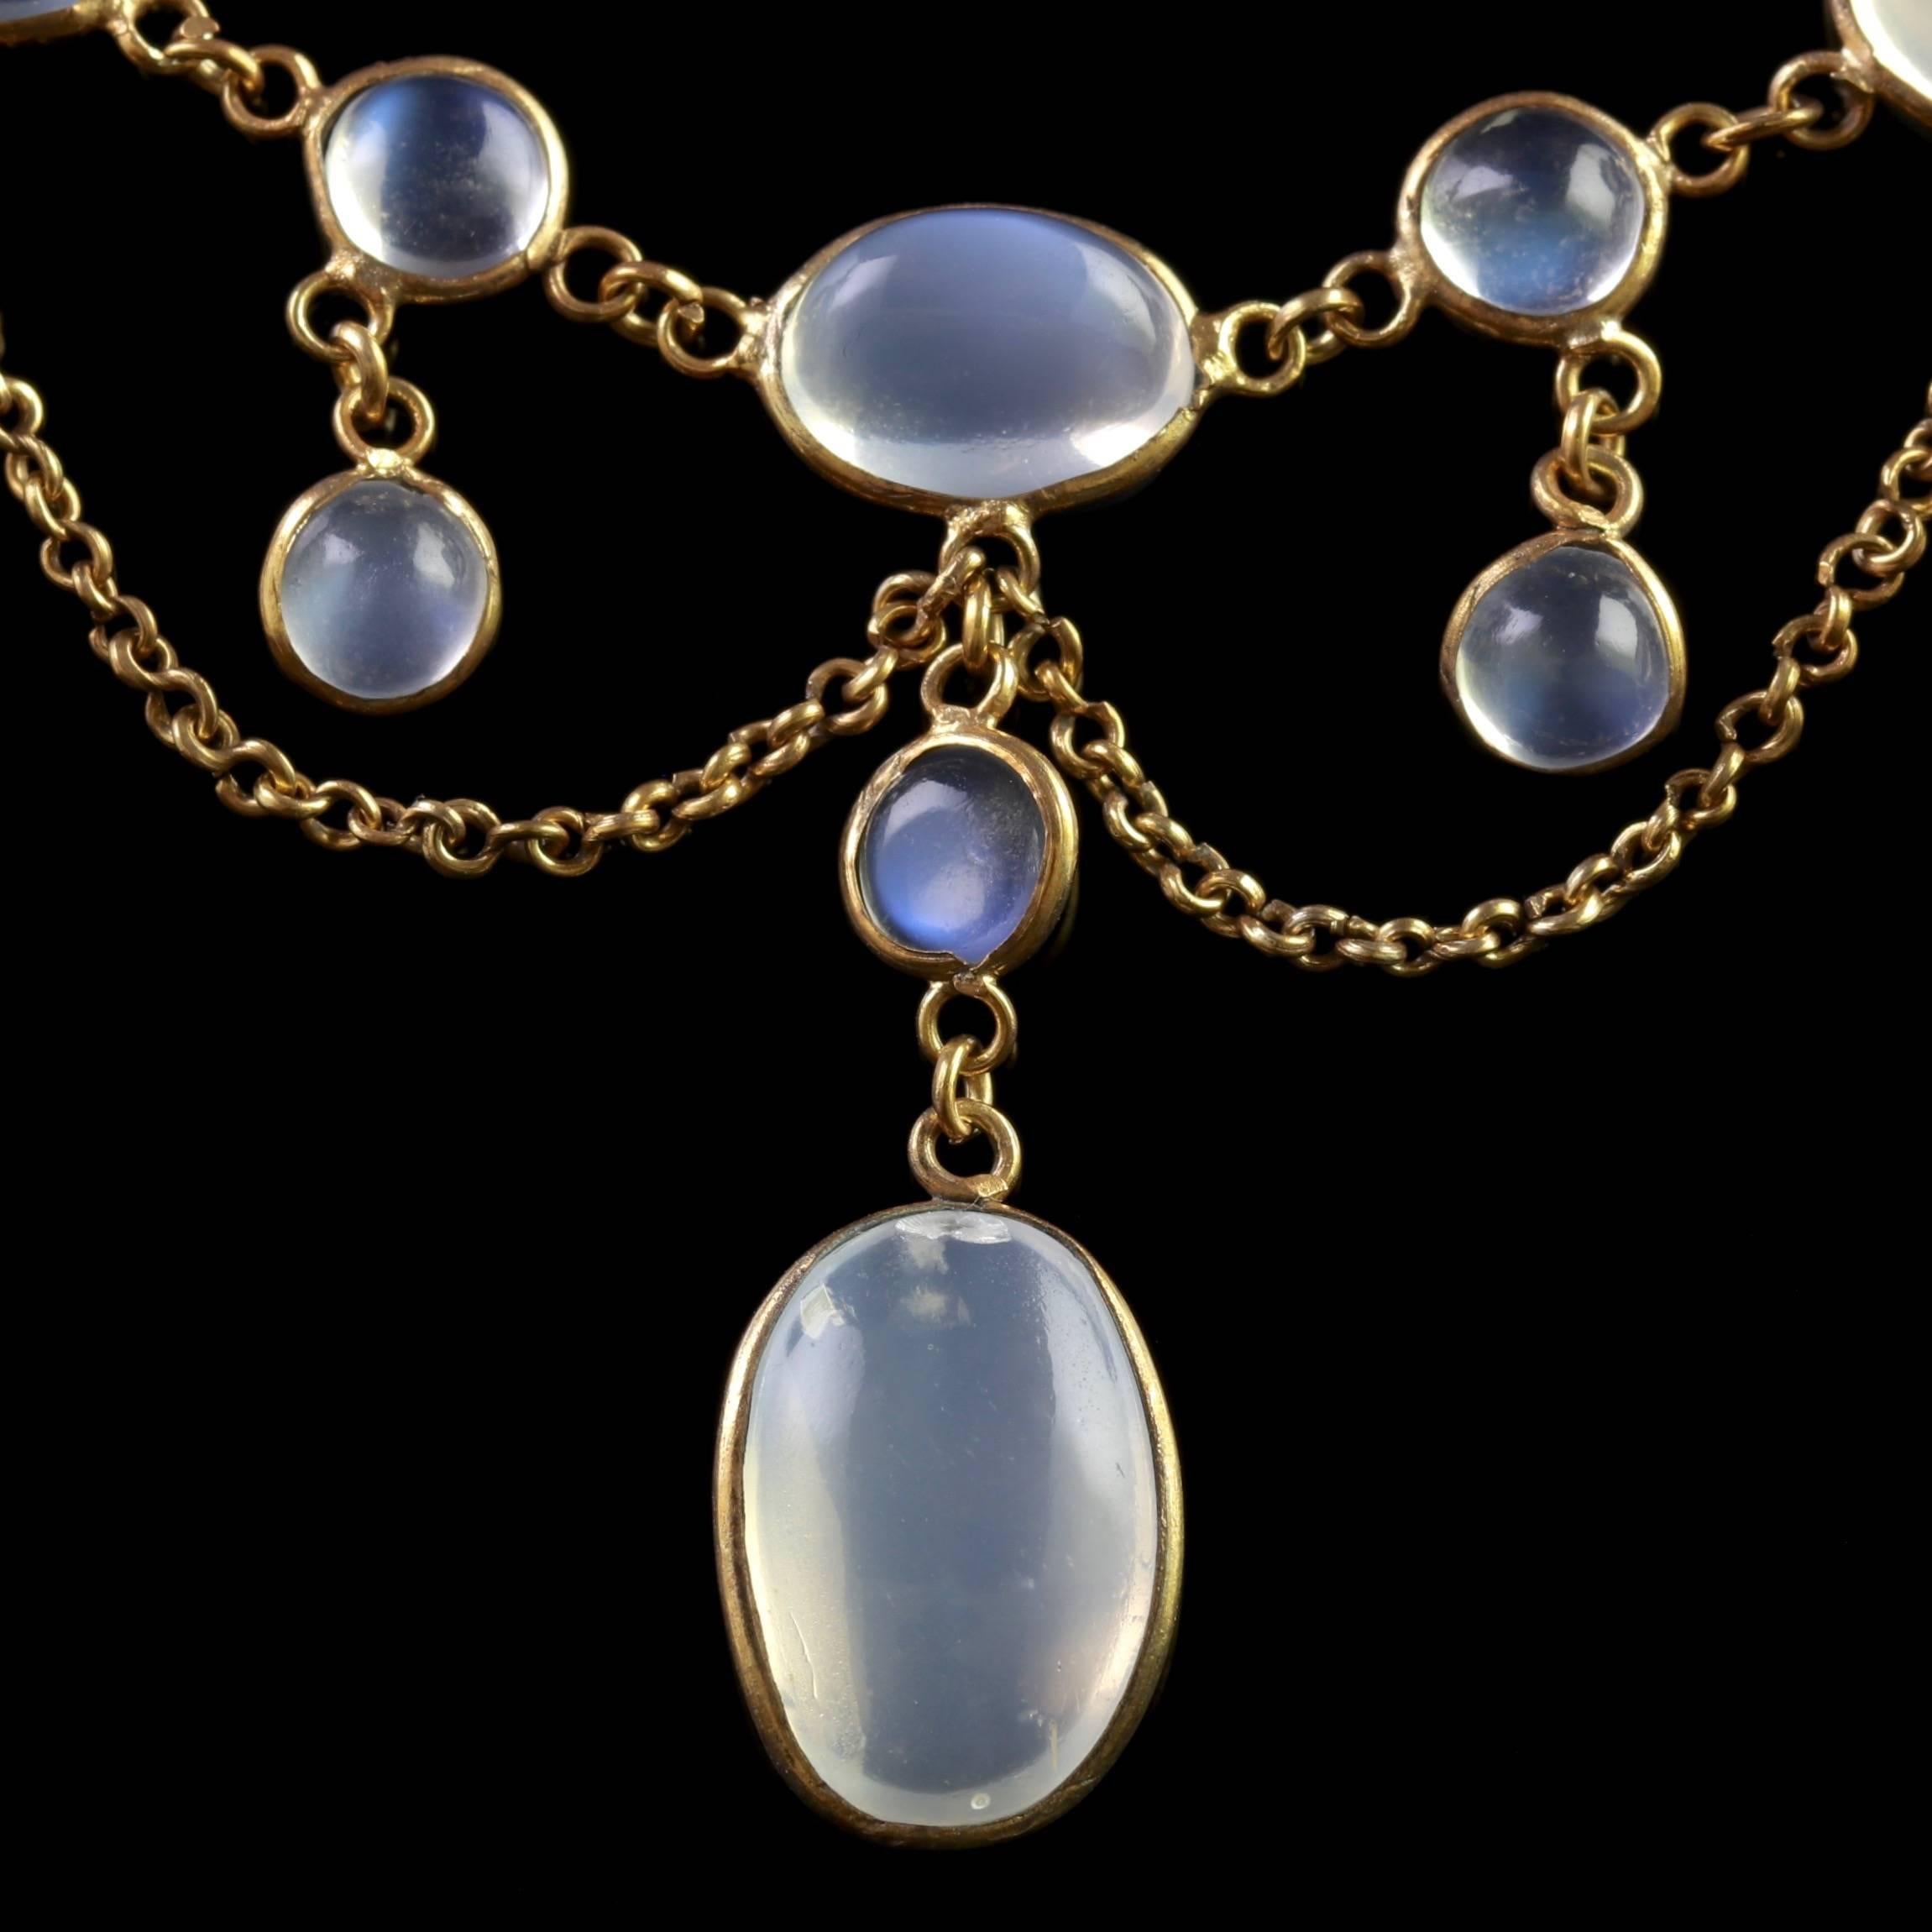 To read more please click continue reading below-

This genuine antique Victorian Moonstone necklace is set in 18ct Yellow Gold on Silver, Circa 1900.

A lovely fringe of ghostly Moonstones are set into a garland display leading to a large Moonstone